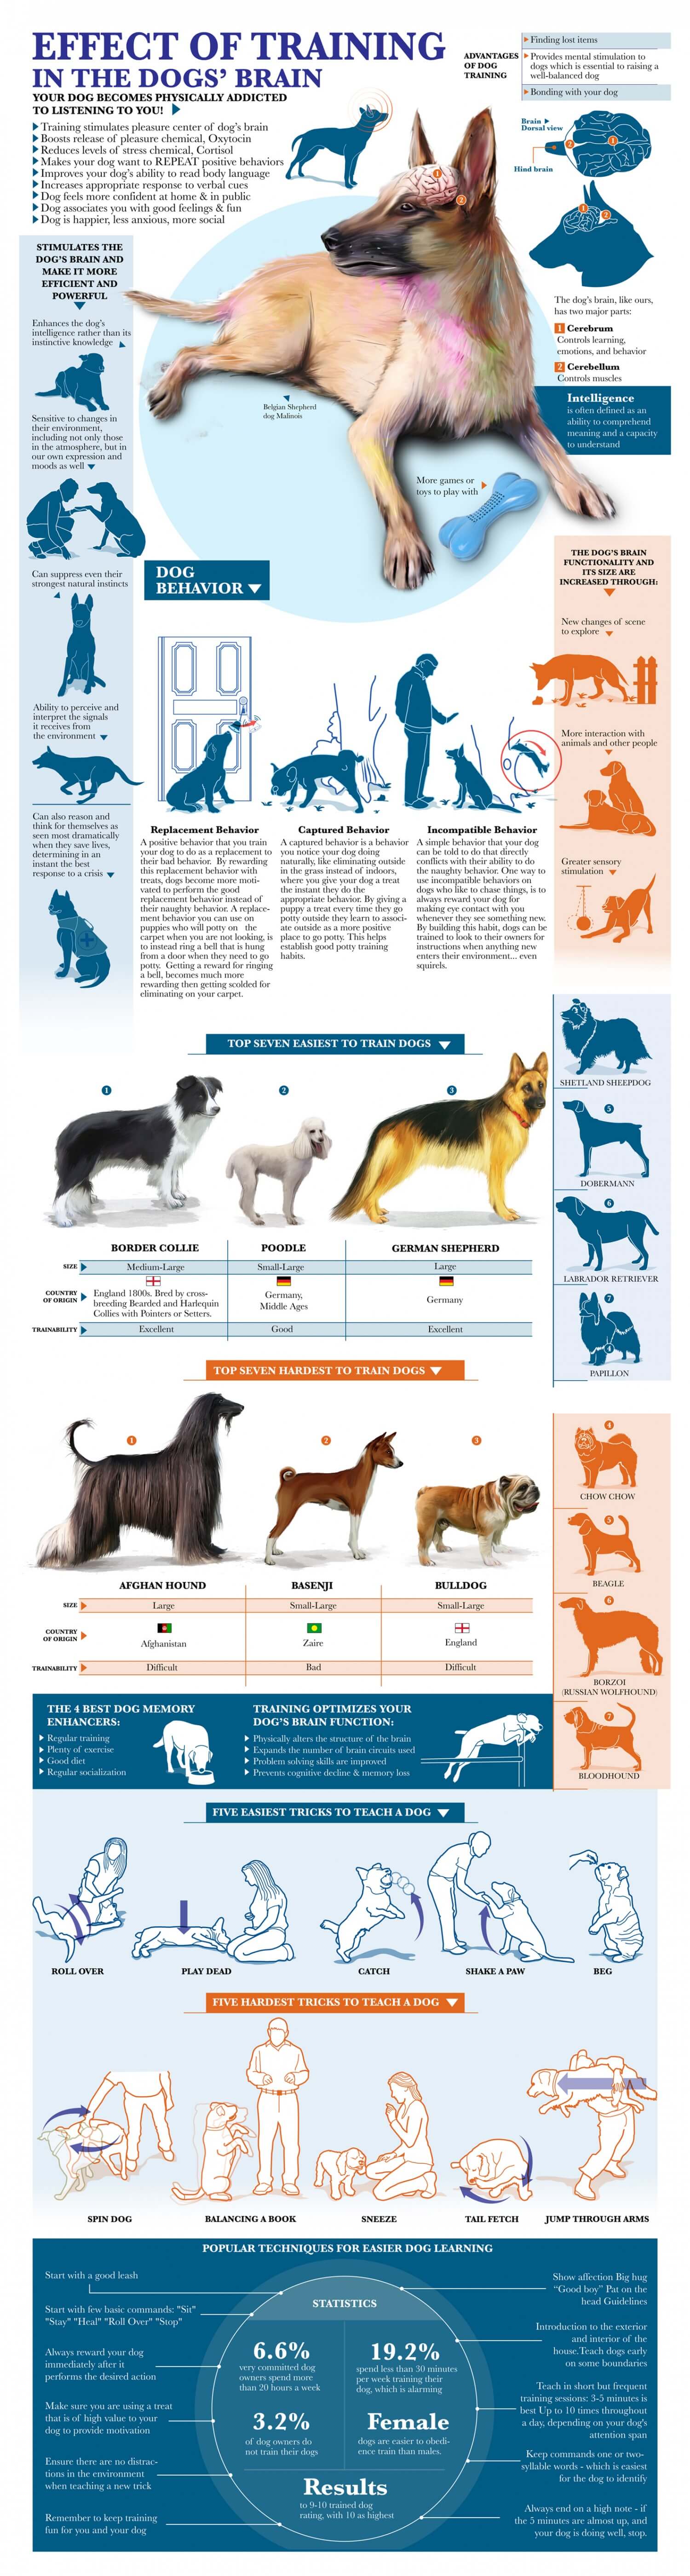 Dog Training & Teaching INFOGRAFICS - PRESS TO SEE IN FULL SIZE!